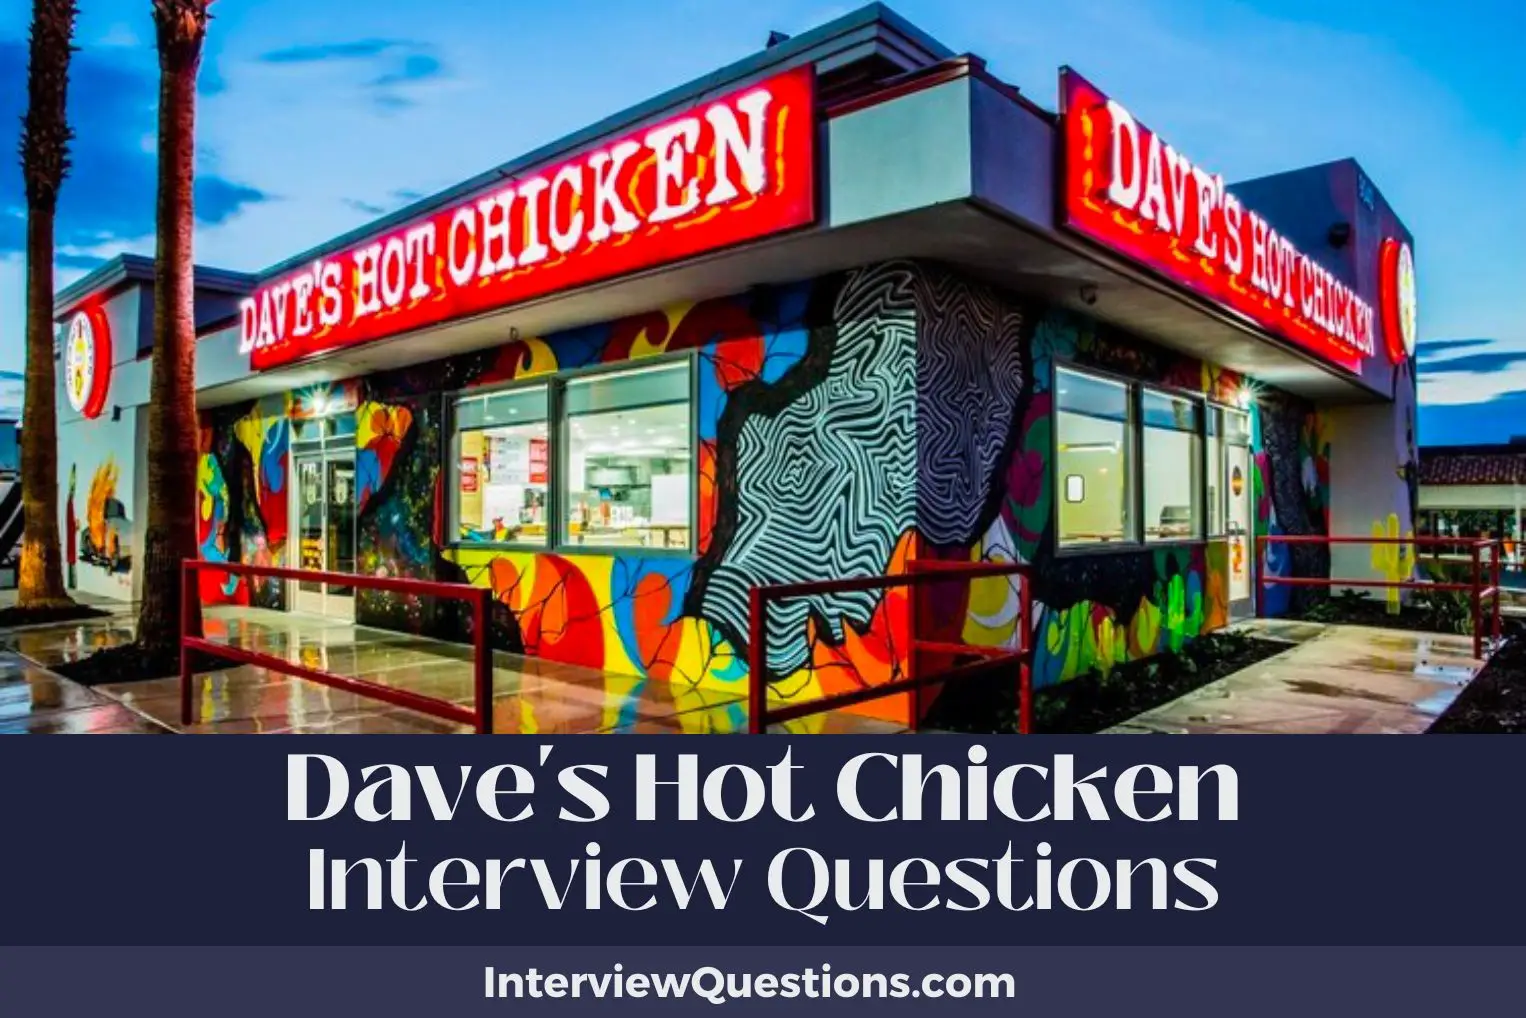 Dave's Hot Chicken Interview Questions